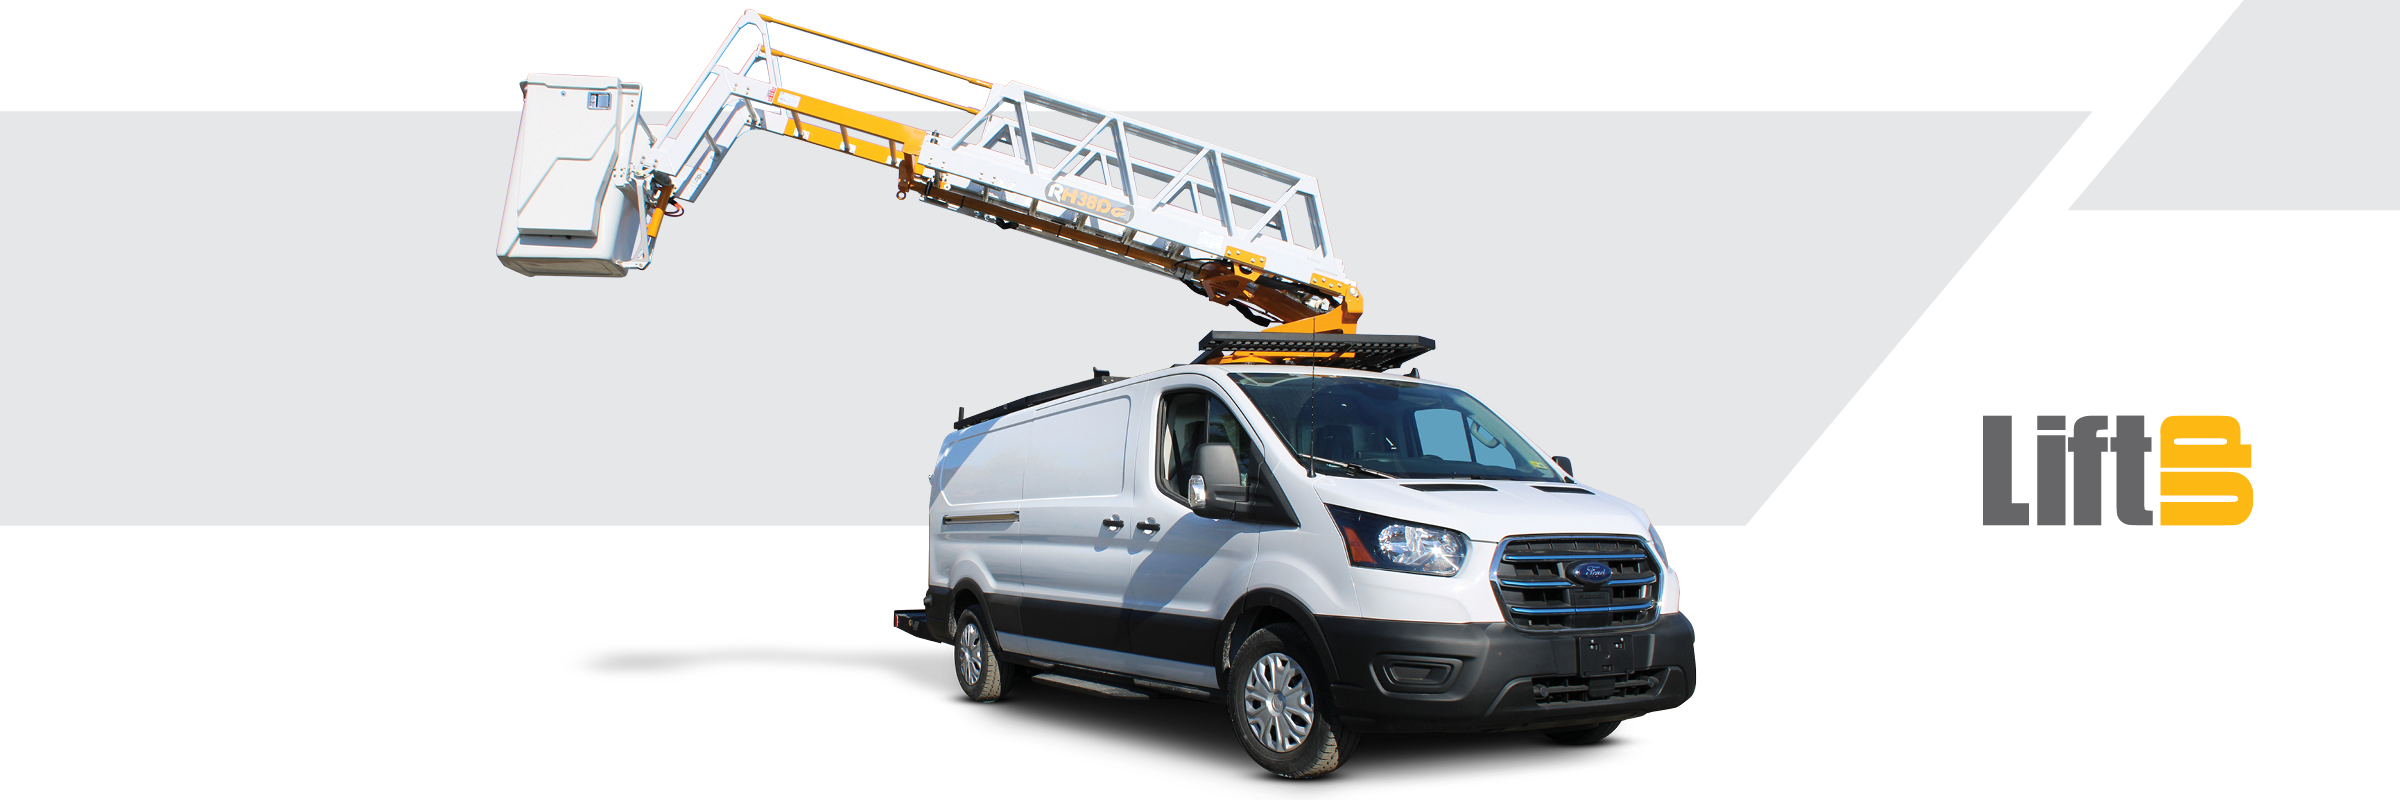 Lift UP Insulated Aerial Lift Ladder on Ford E-Transit Cargo Van